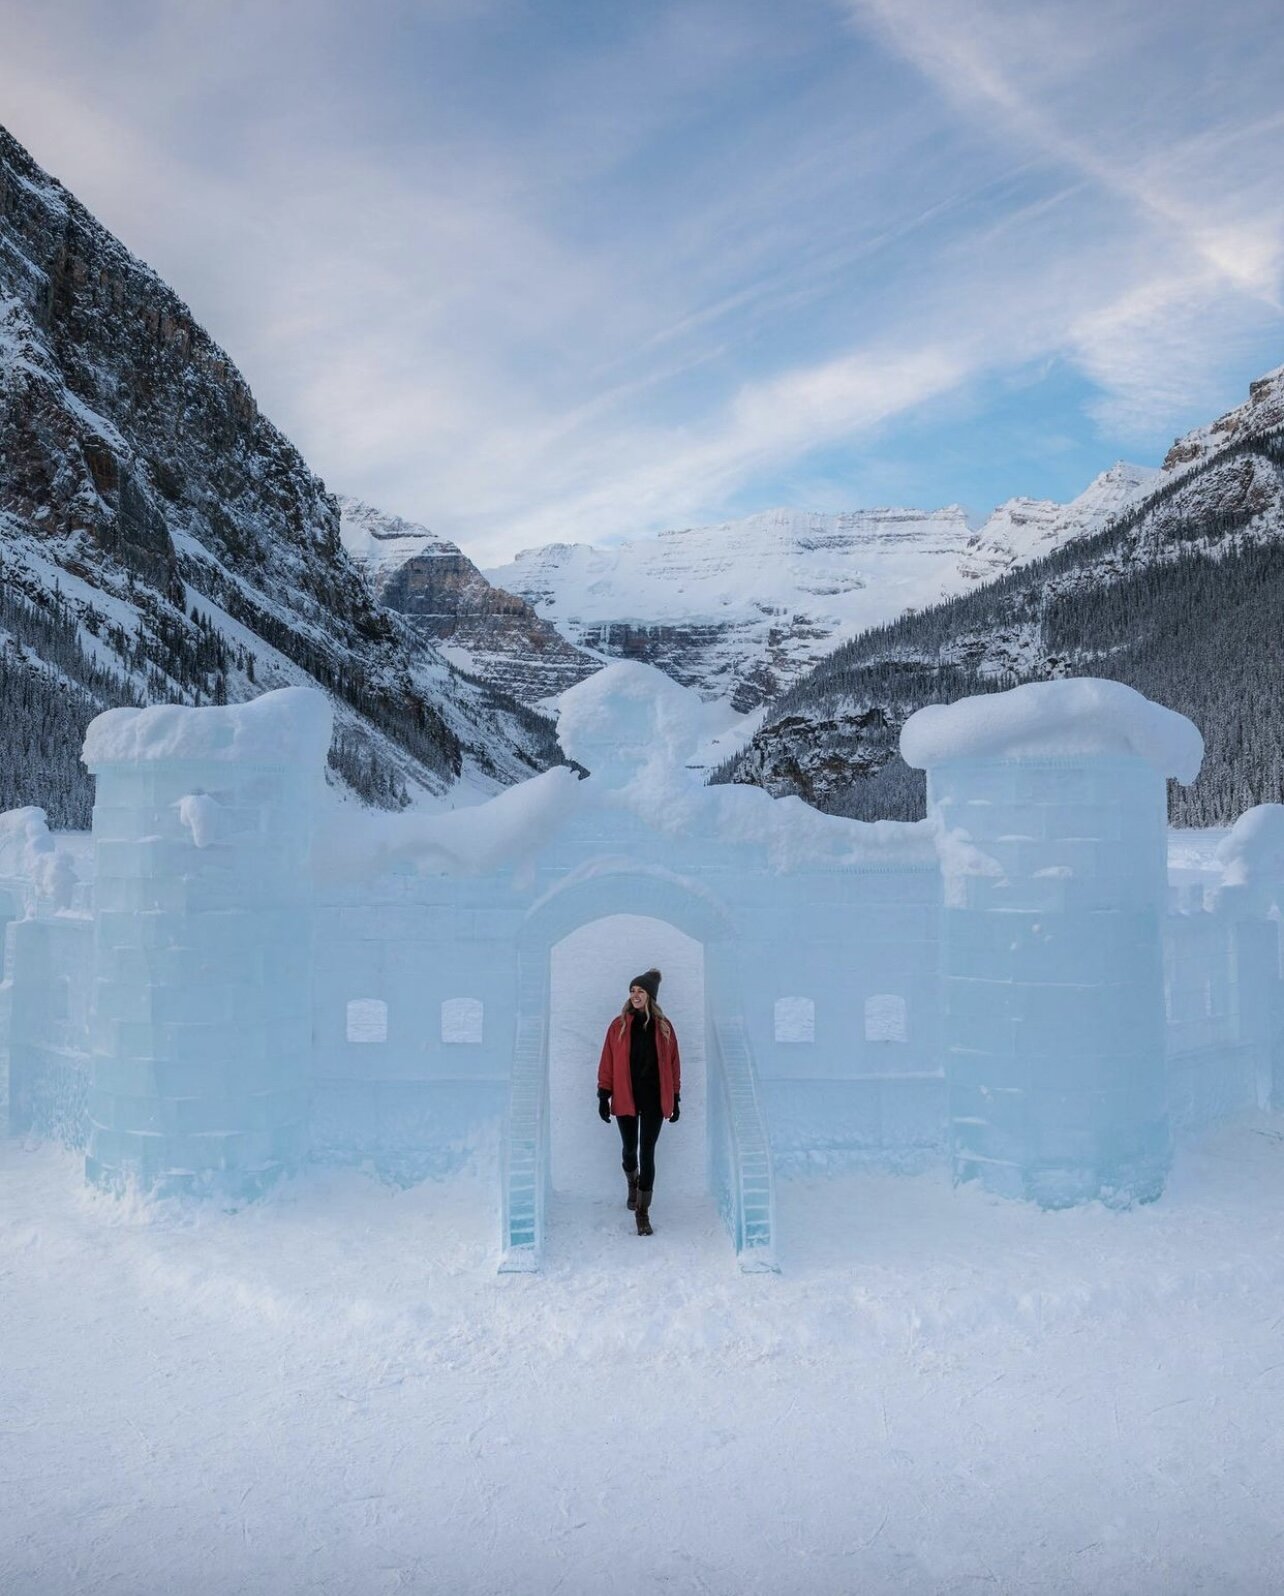 Tote Bag of Ice Castle on Lake Louise. Banff National Park